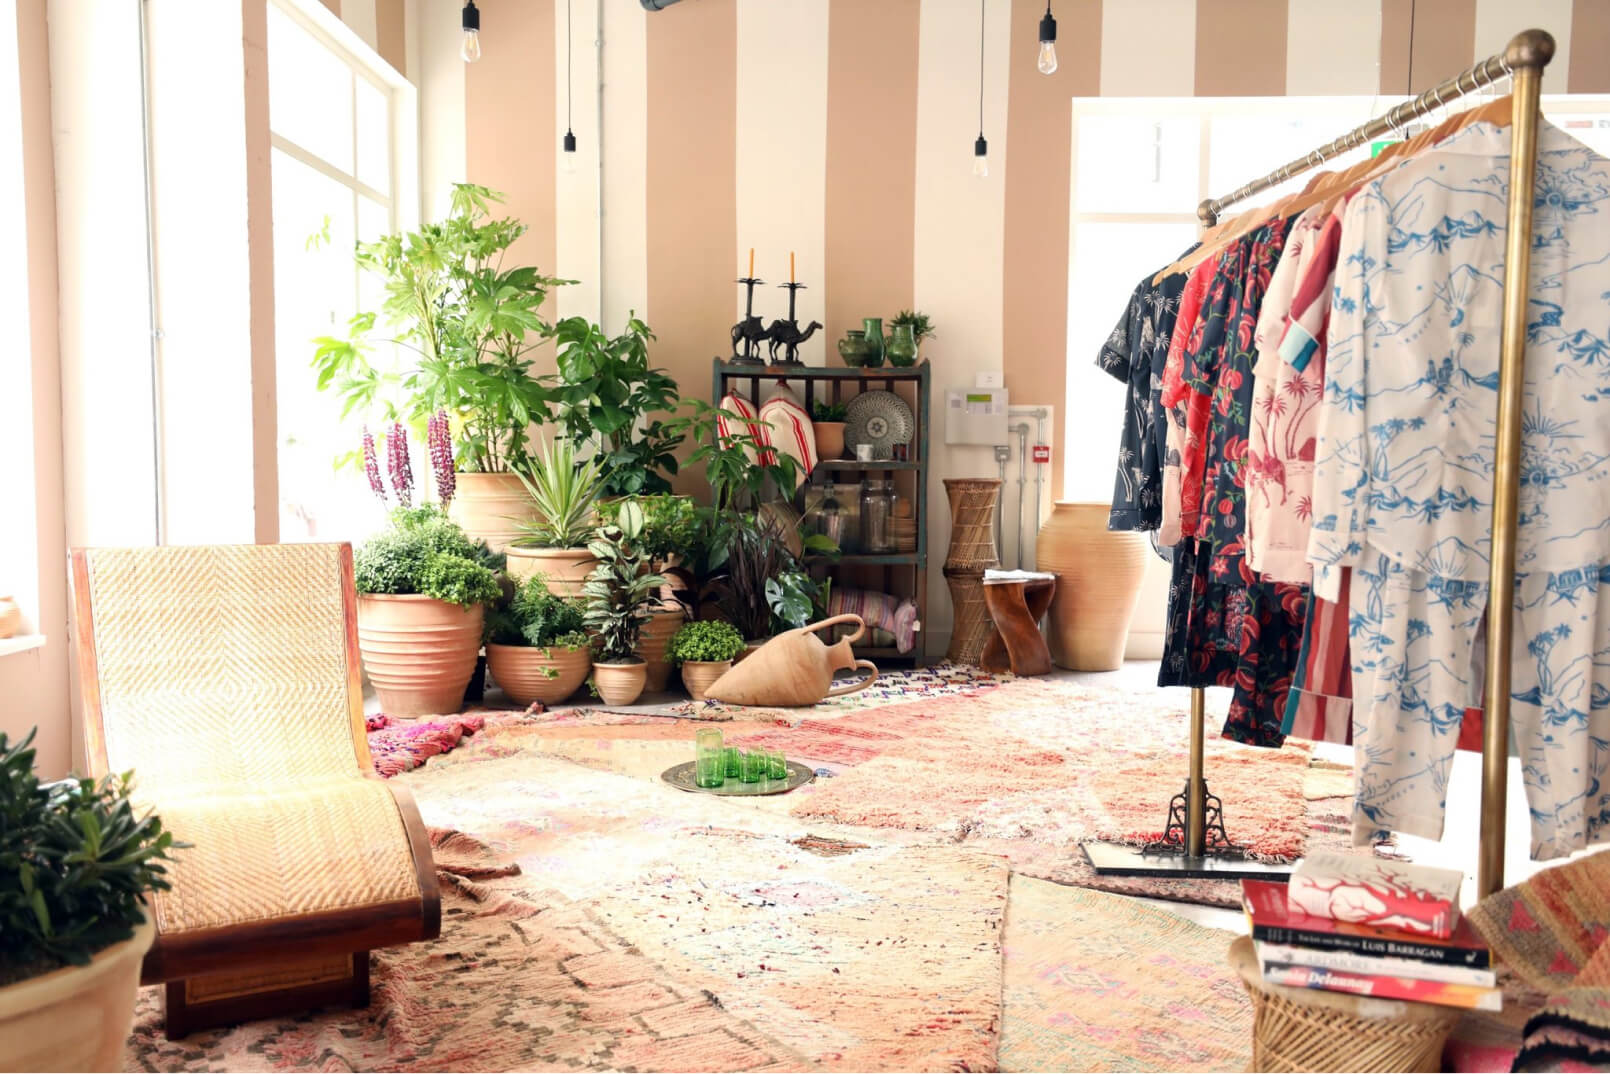 A golden clothing rack with several pairs of colourful Desmond & Dempsey pyjamas, hanging in a bright room with many plants.